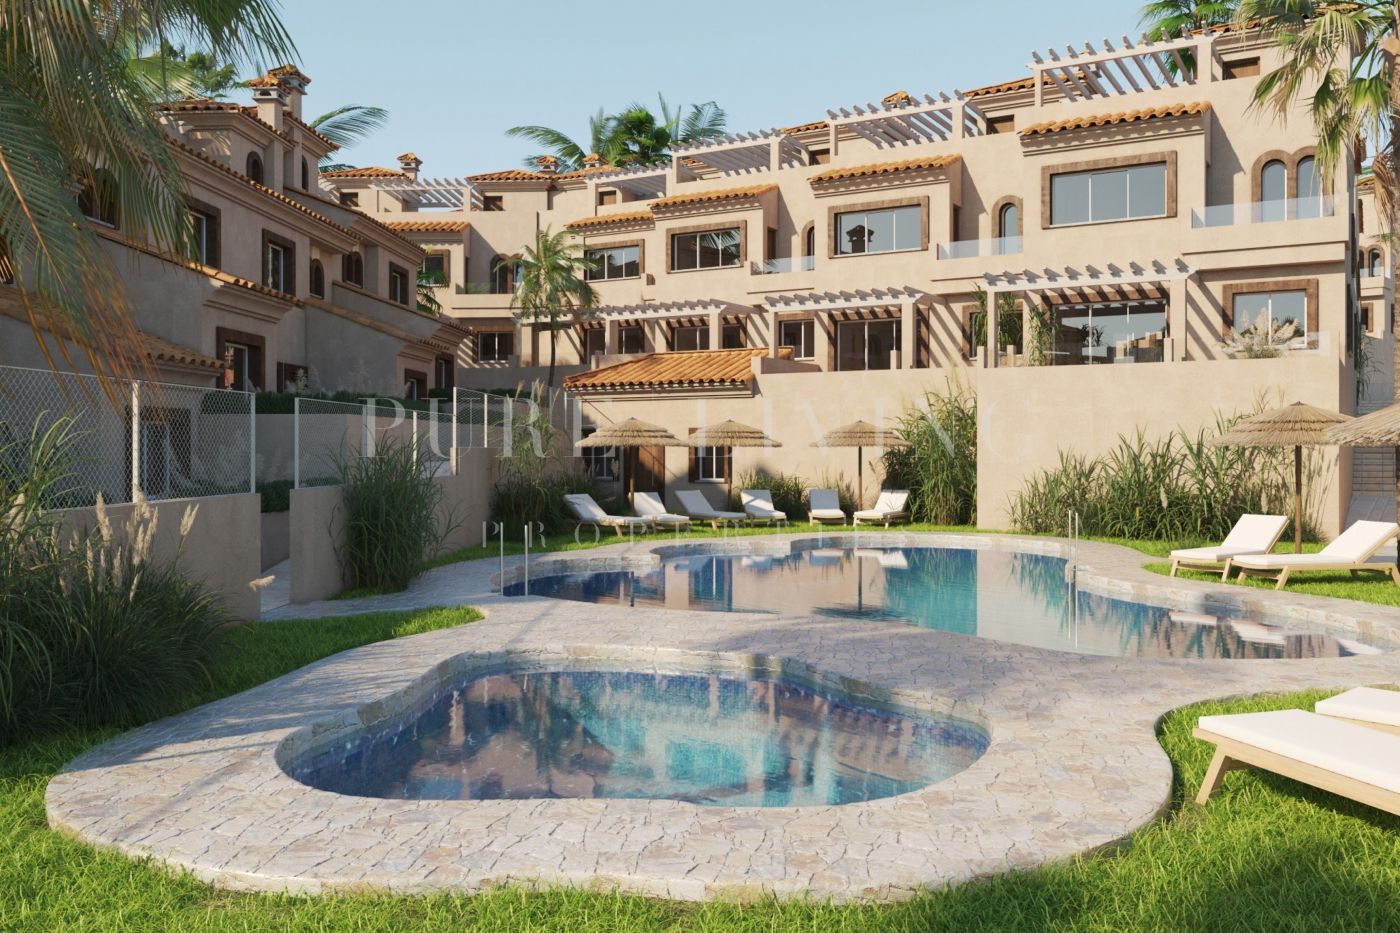 Andalusian-style architecture in the heart of golf in Estepona